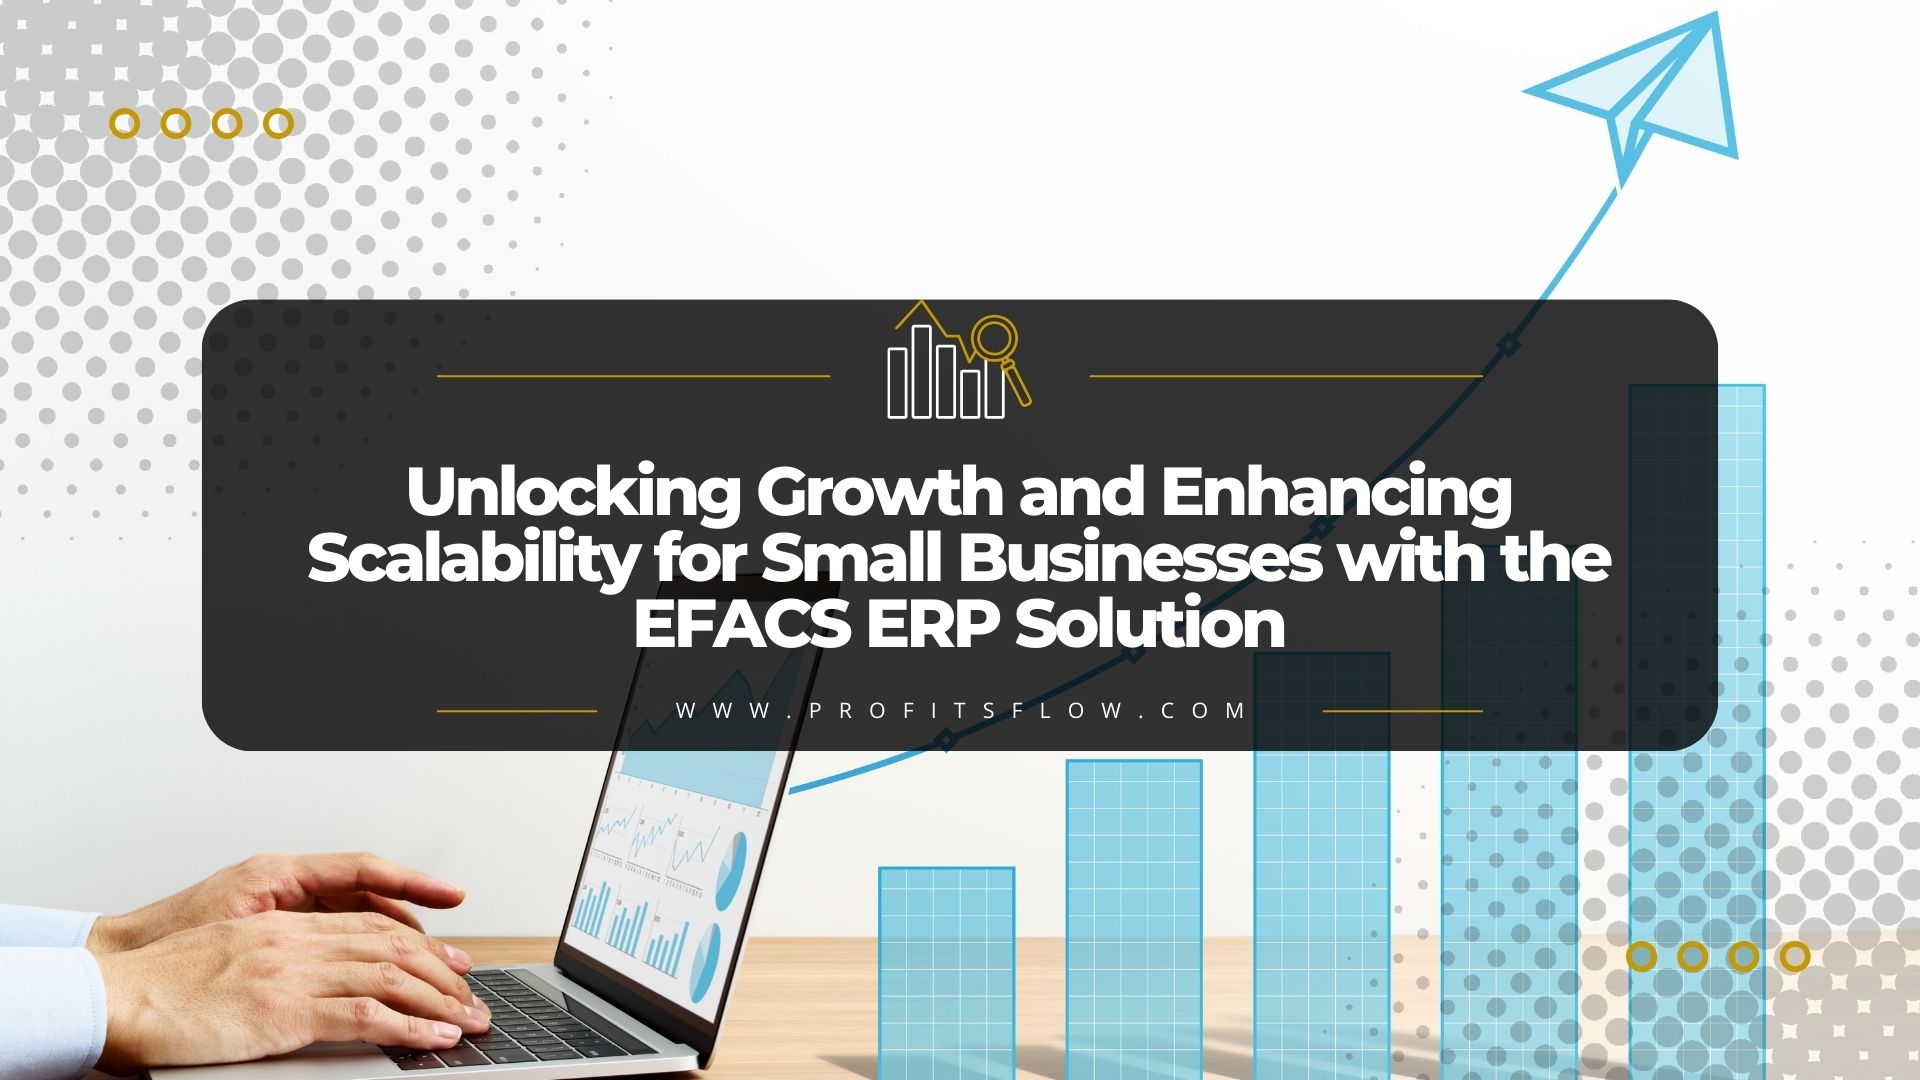 Unlocking Growth and Enhancing Scalability for Small Businesses with the EFACS ERP Solution